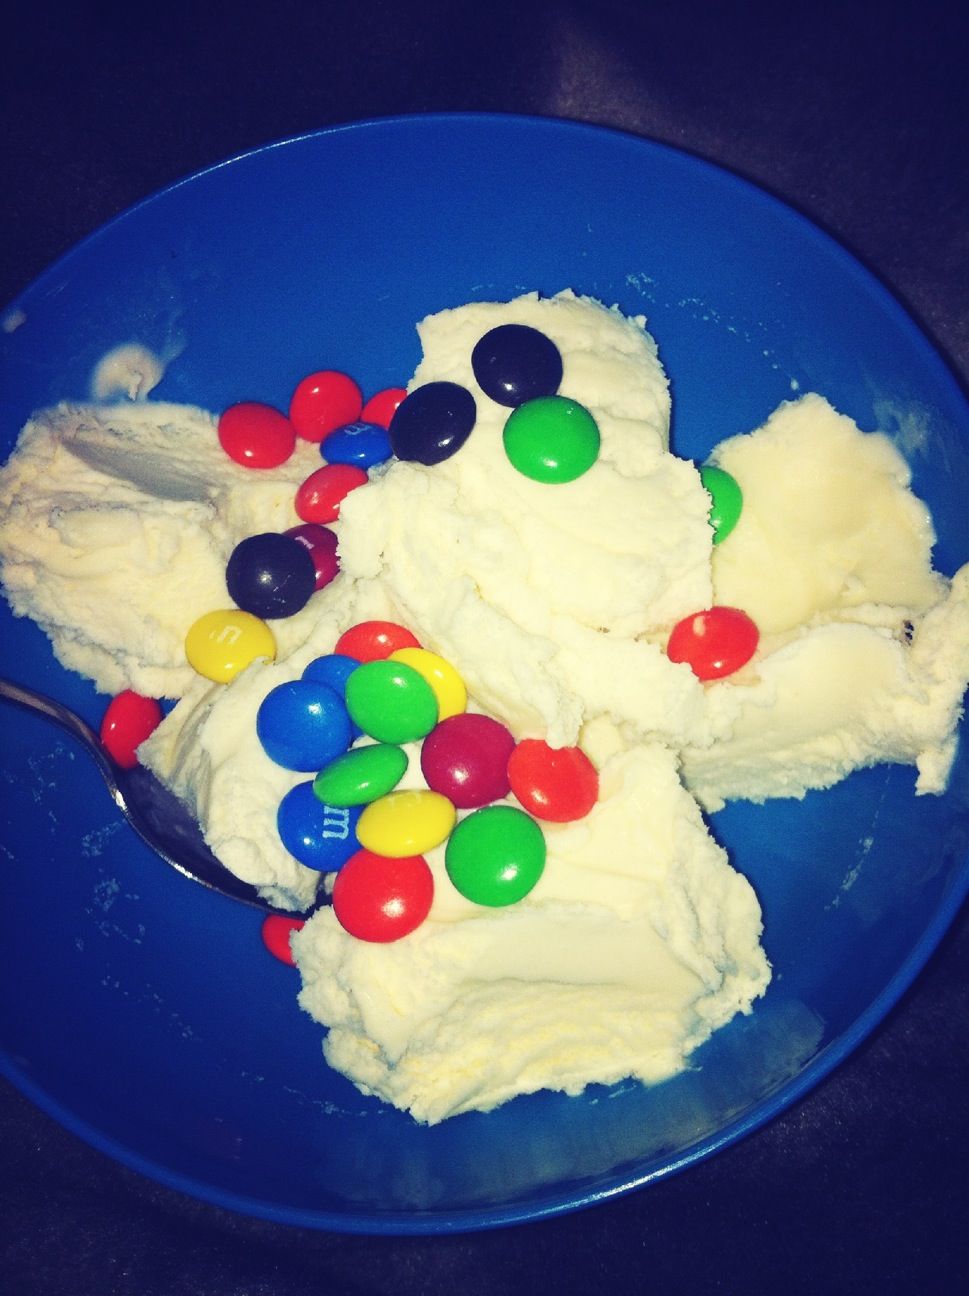 Ice Cream With M&M's #yummy #icecream #in #icy #weather